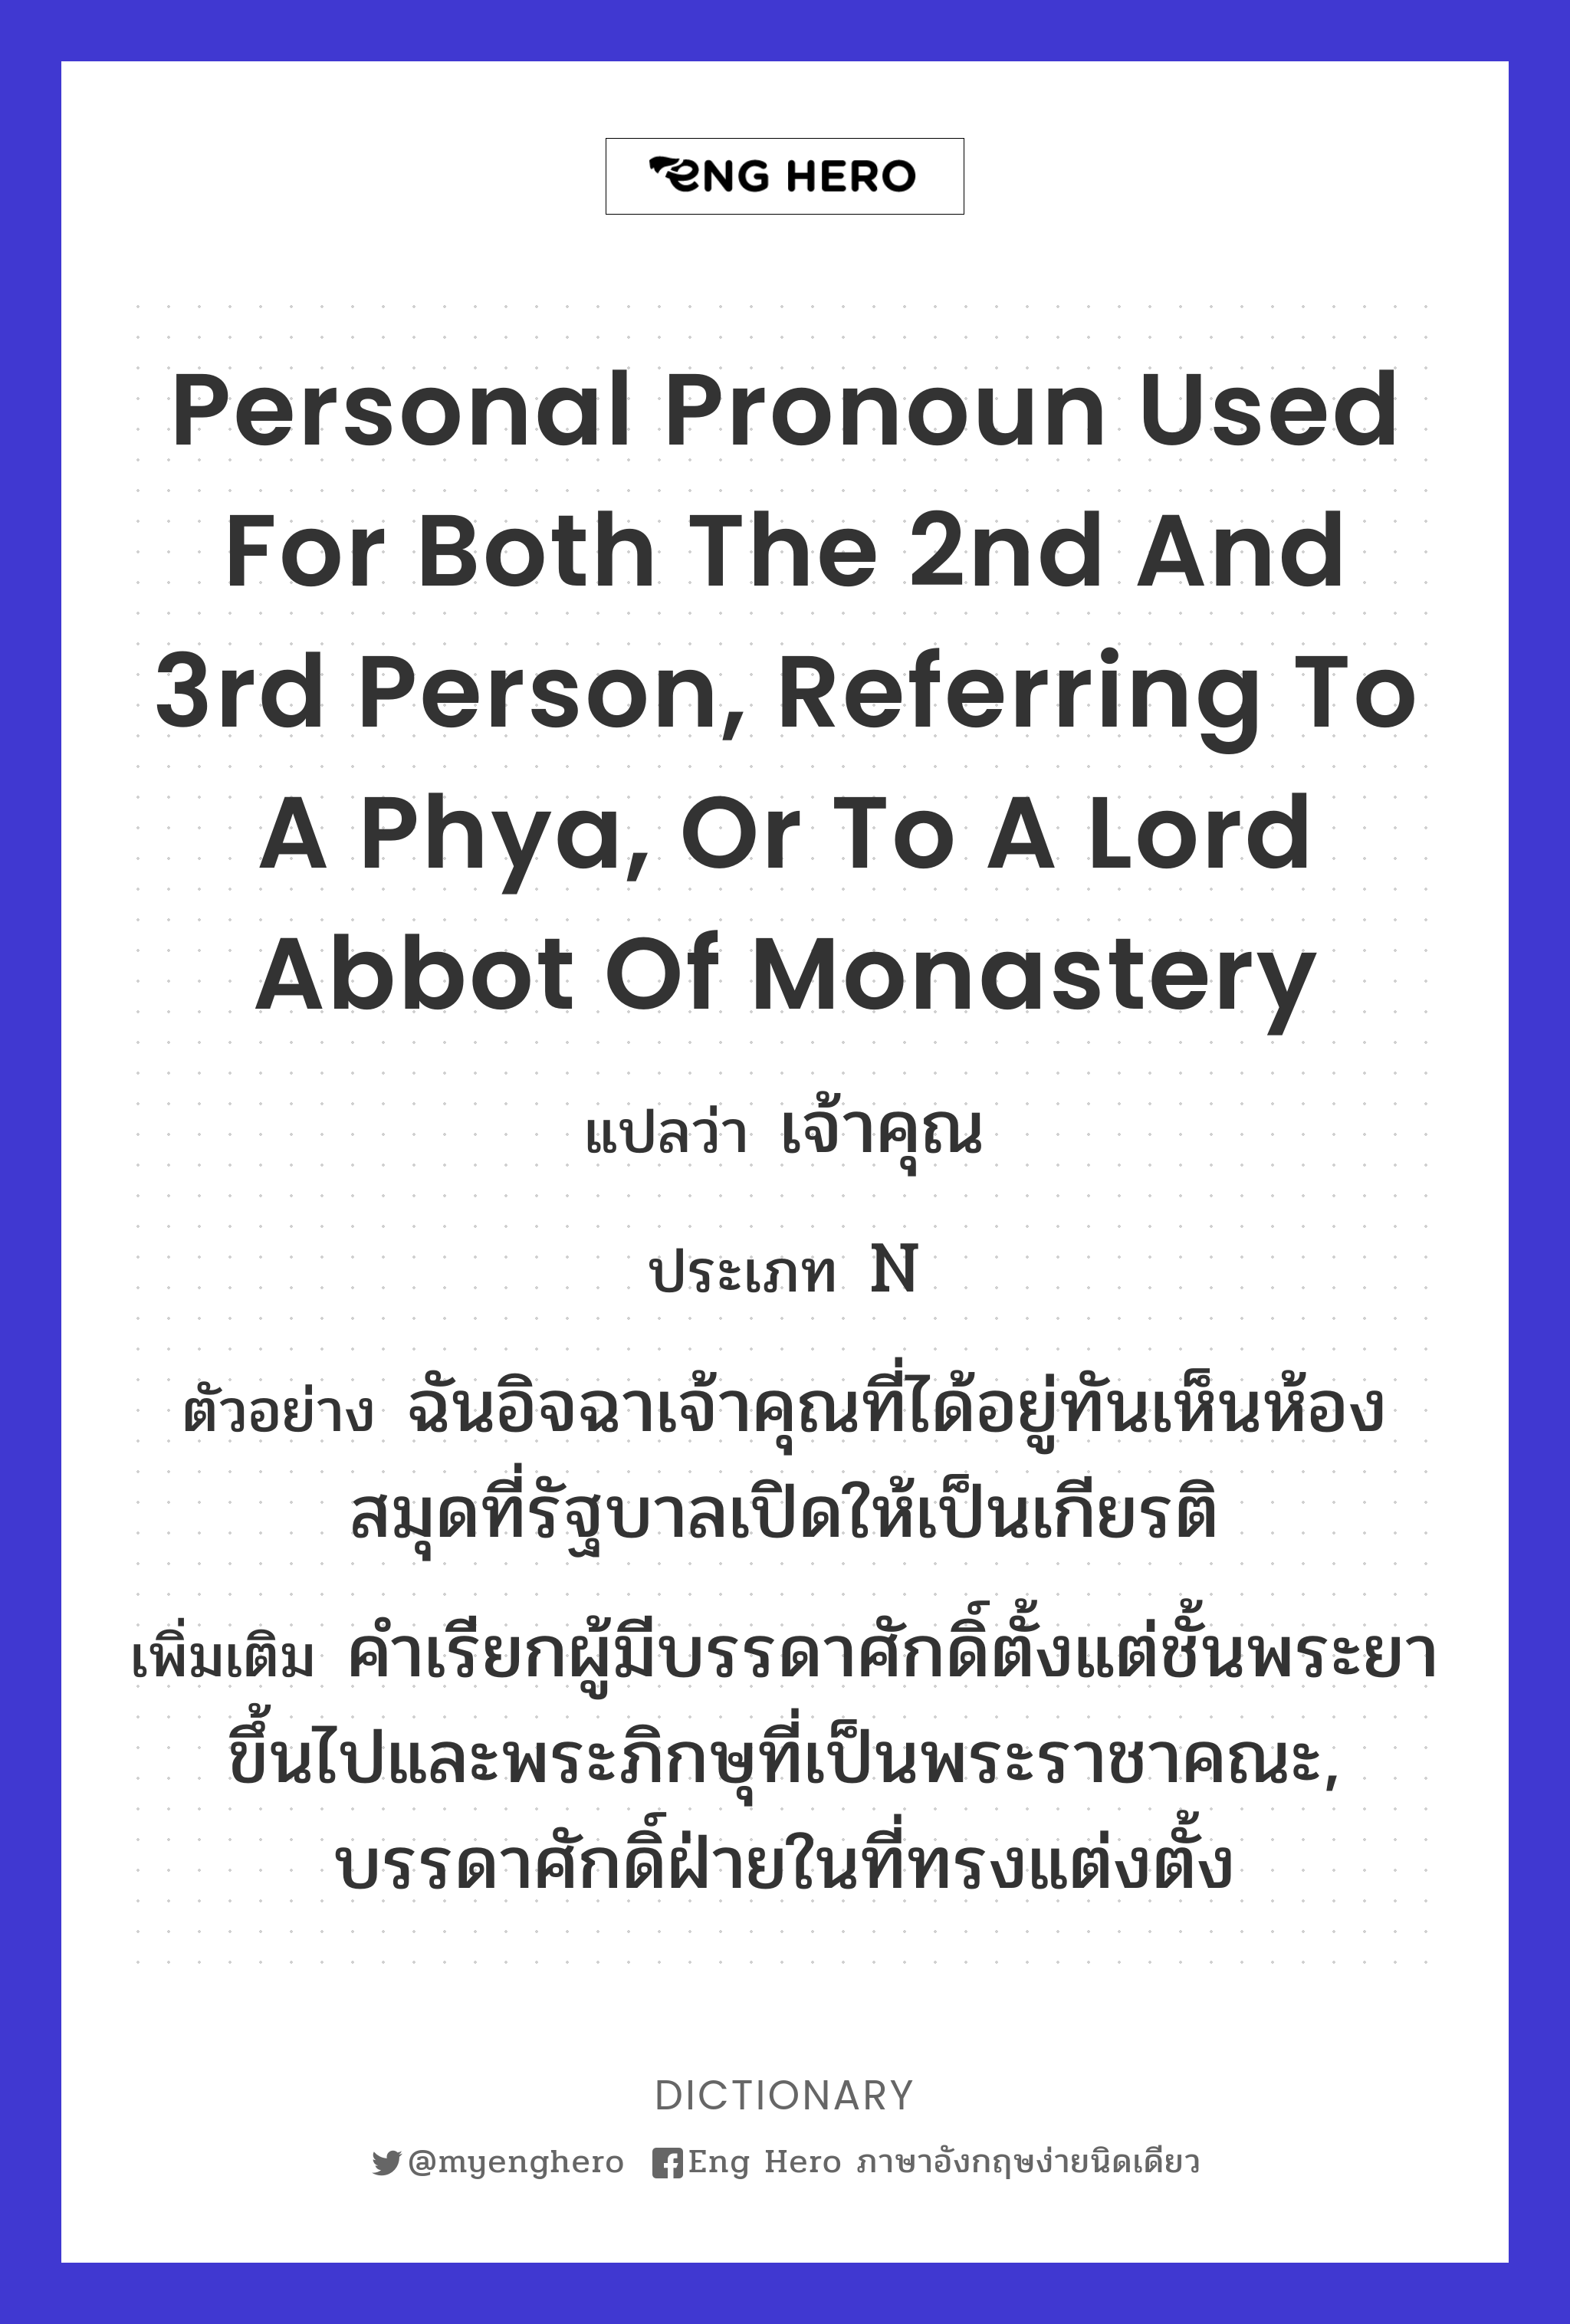 personal pronoun used for both the 2nd and 3rd person, referring to a Phya, or to a Lord Abbot of monastery